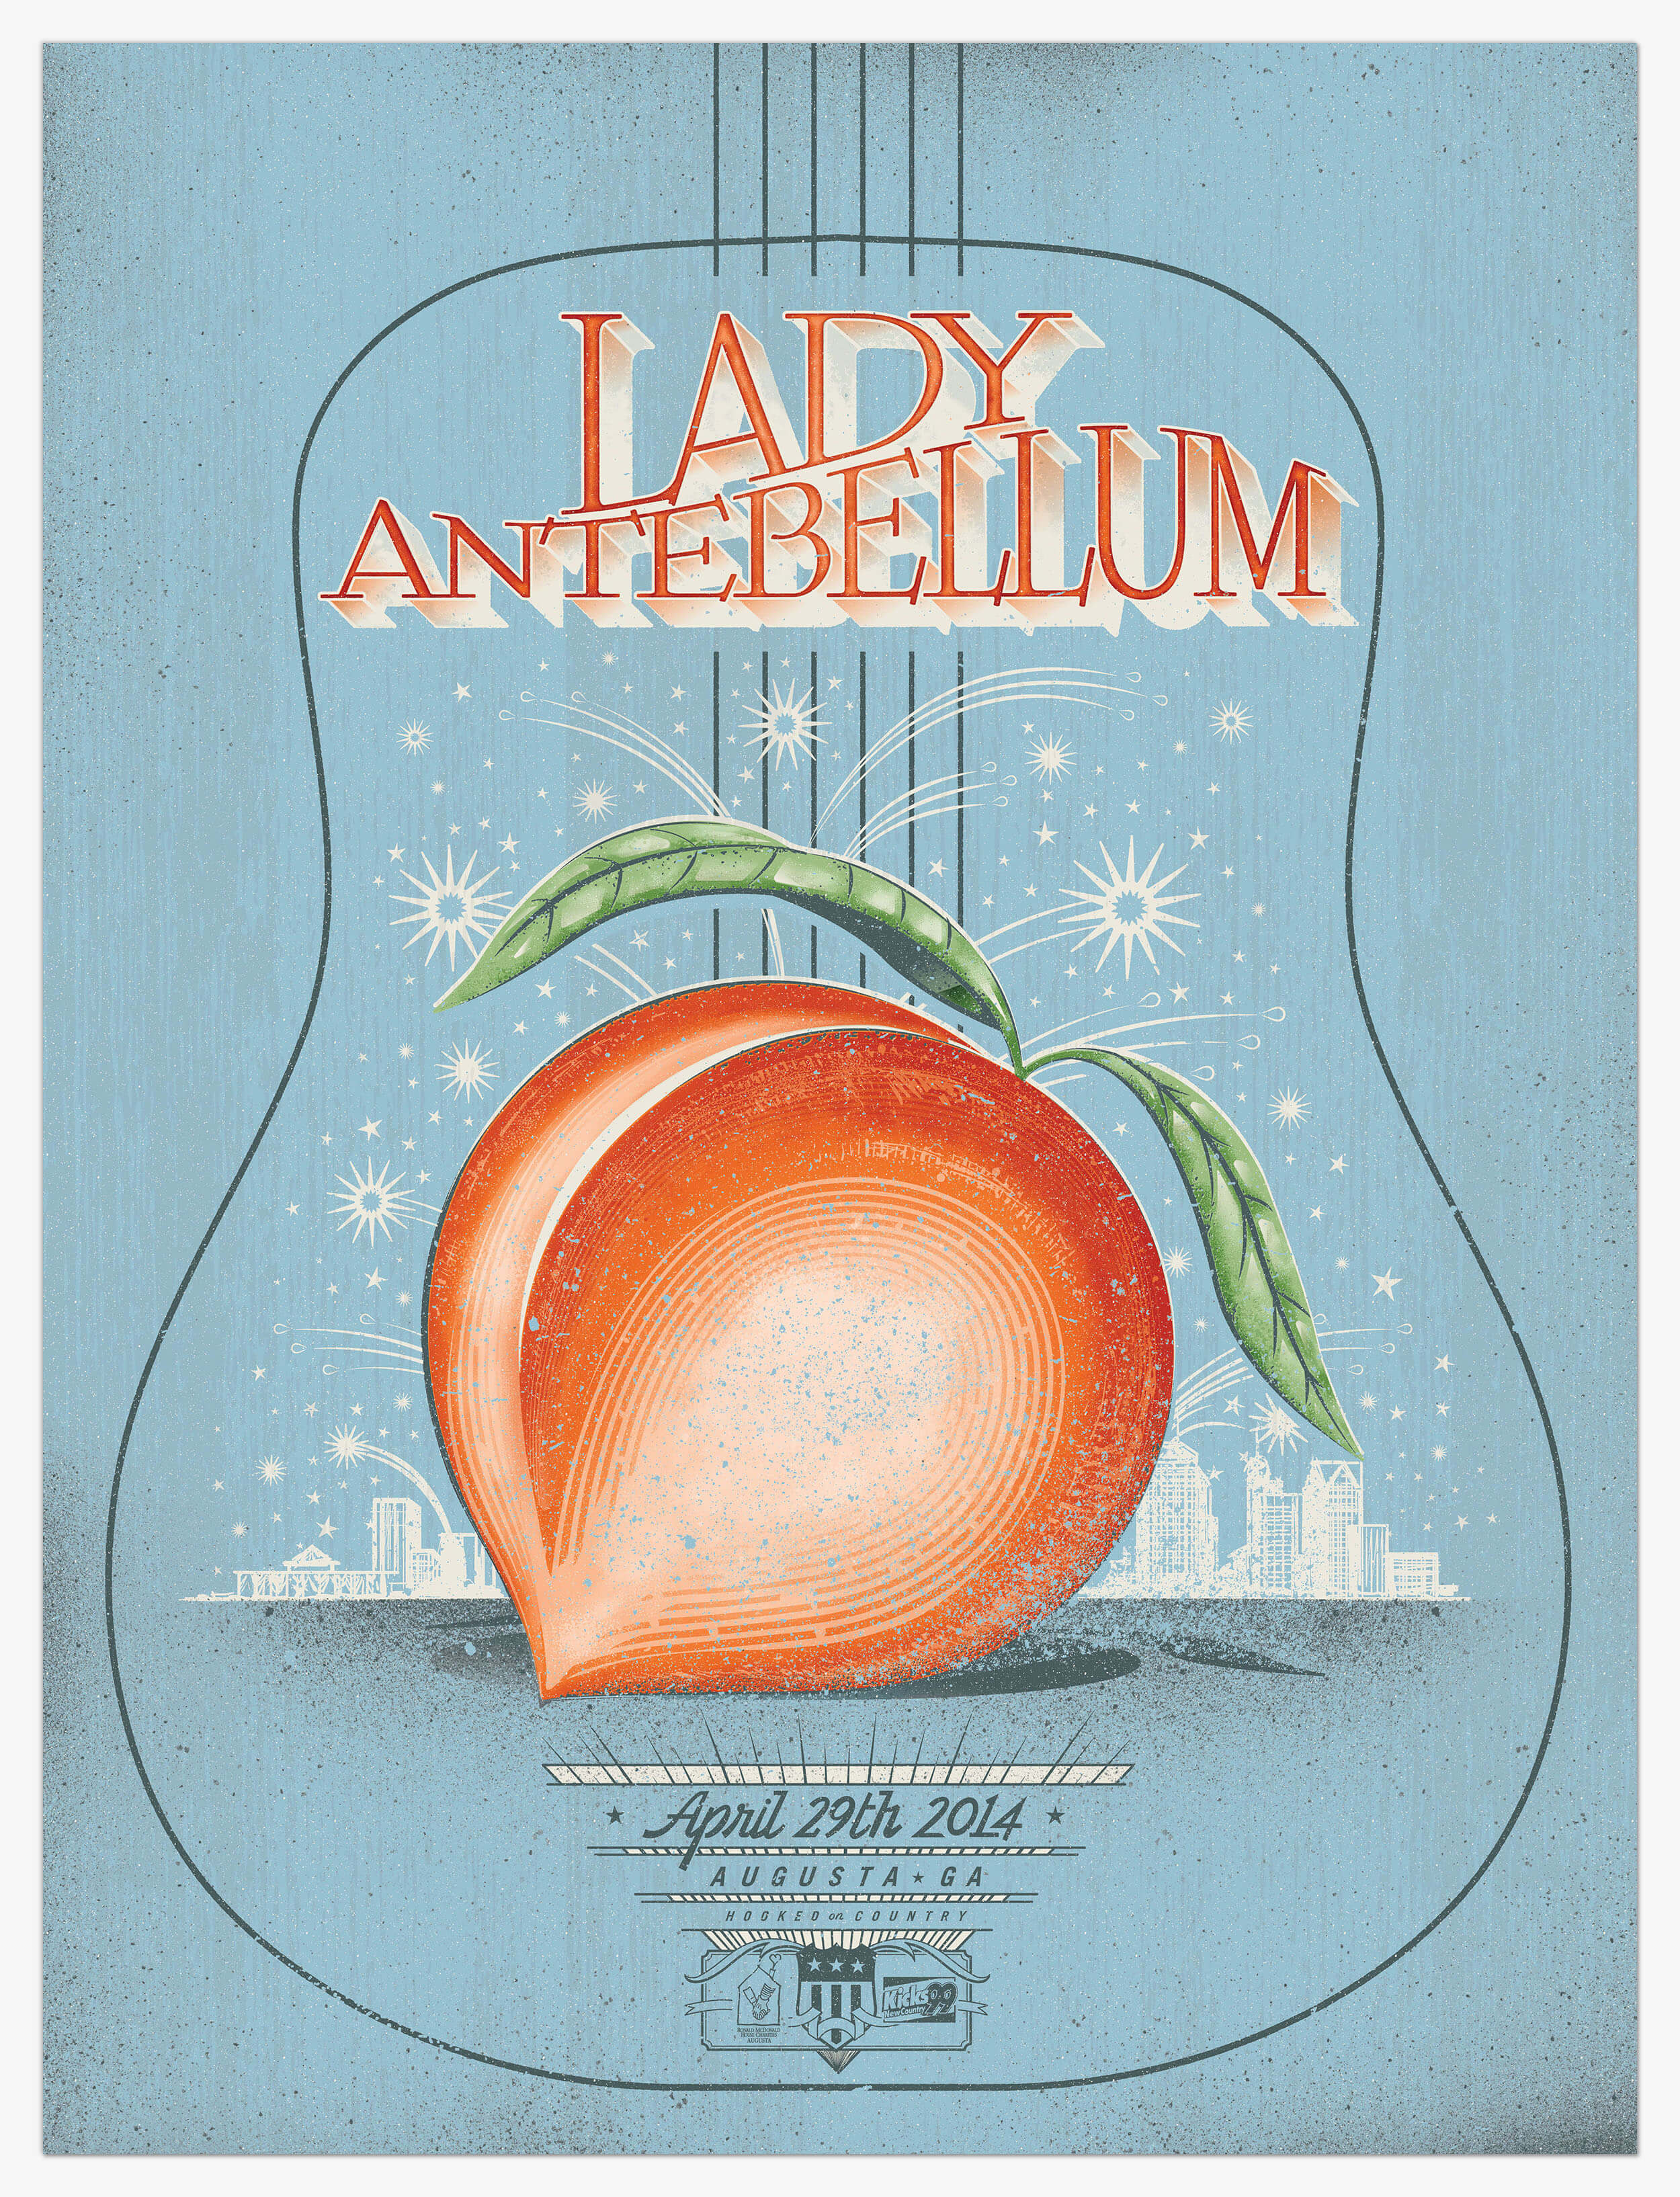 Poster design, illustration, lettering, typography featuring custom typography, a peach and monolinear guitar with fireworks for Lady Antebellum concert in Augusta, Georgia